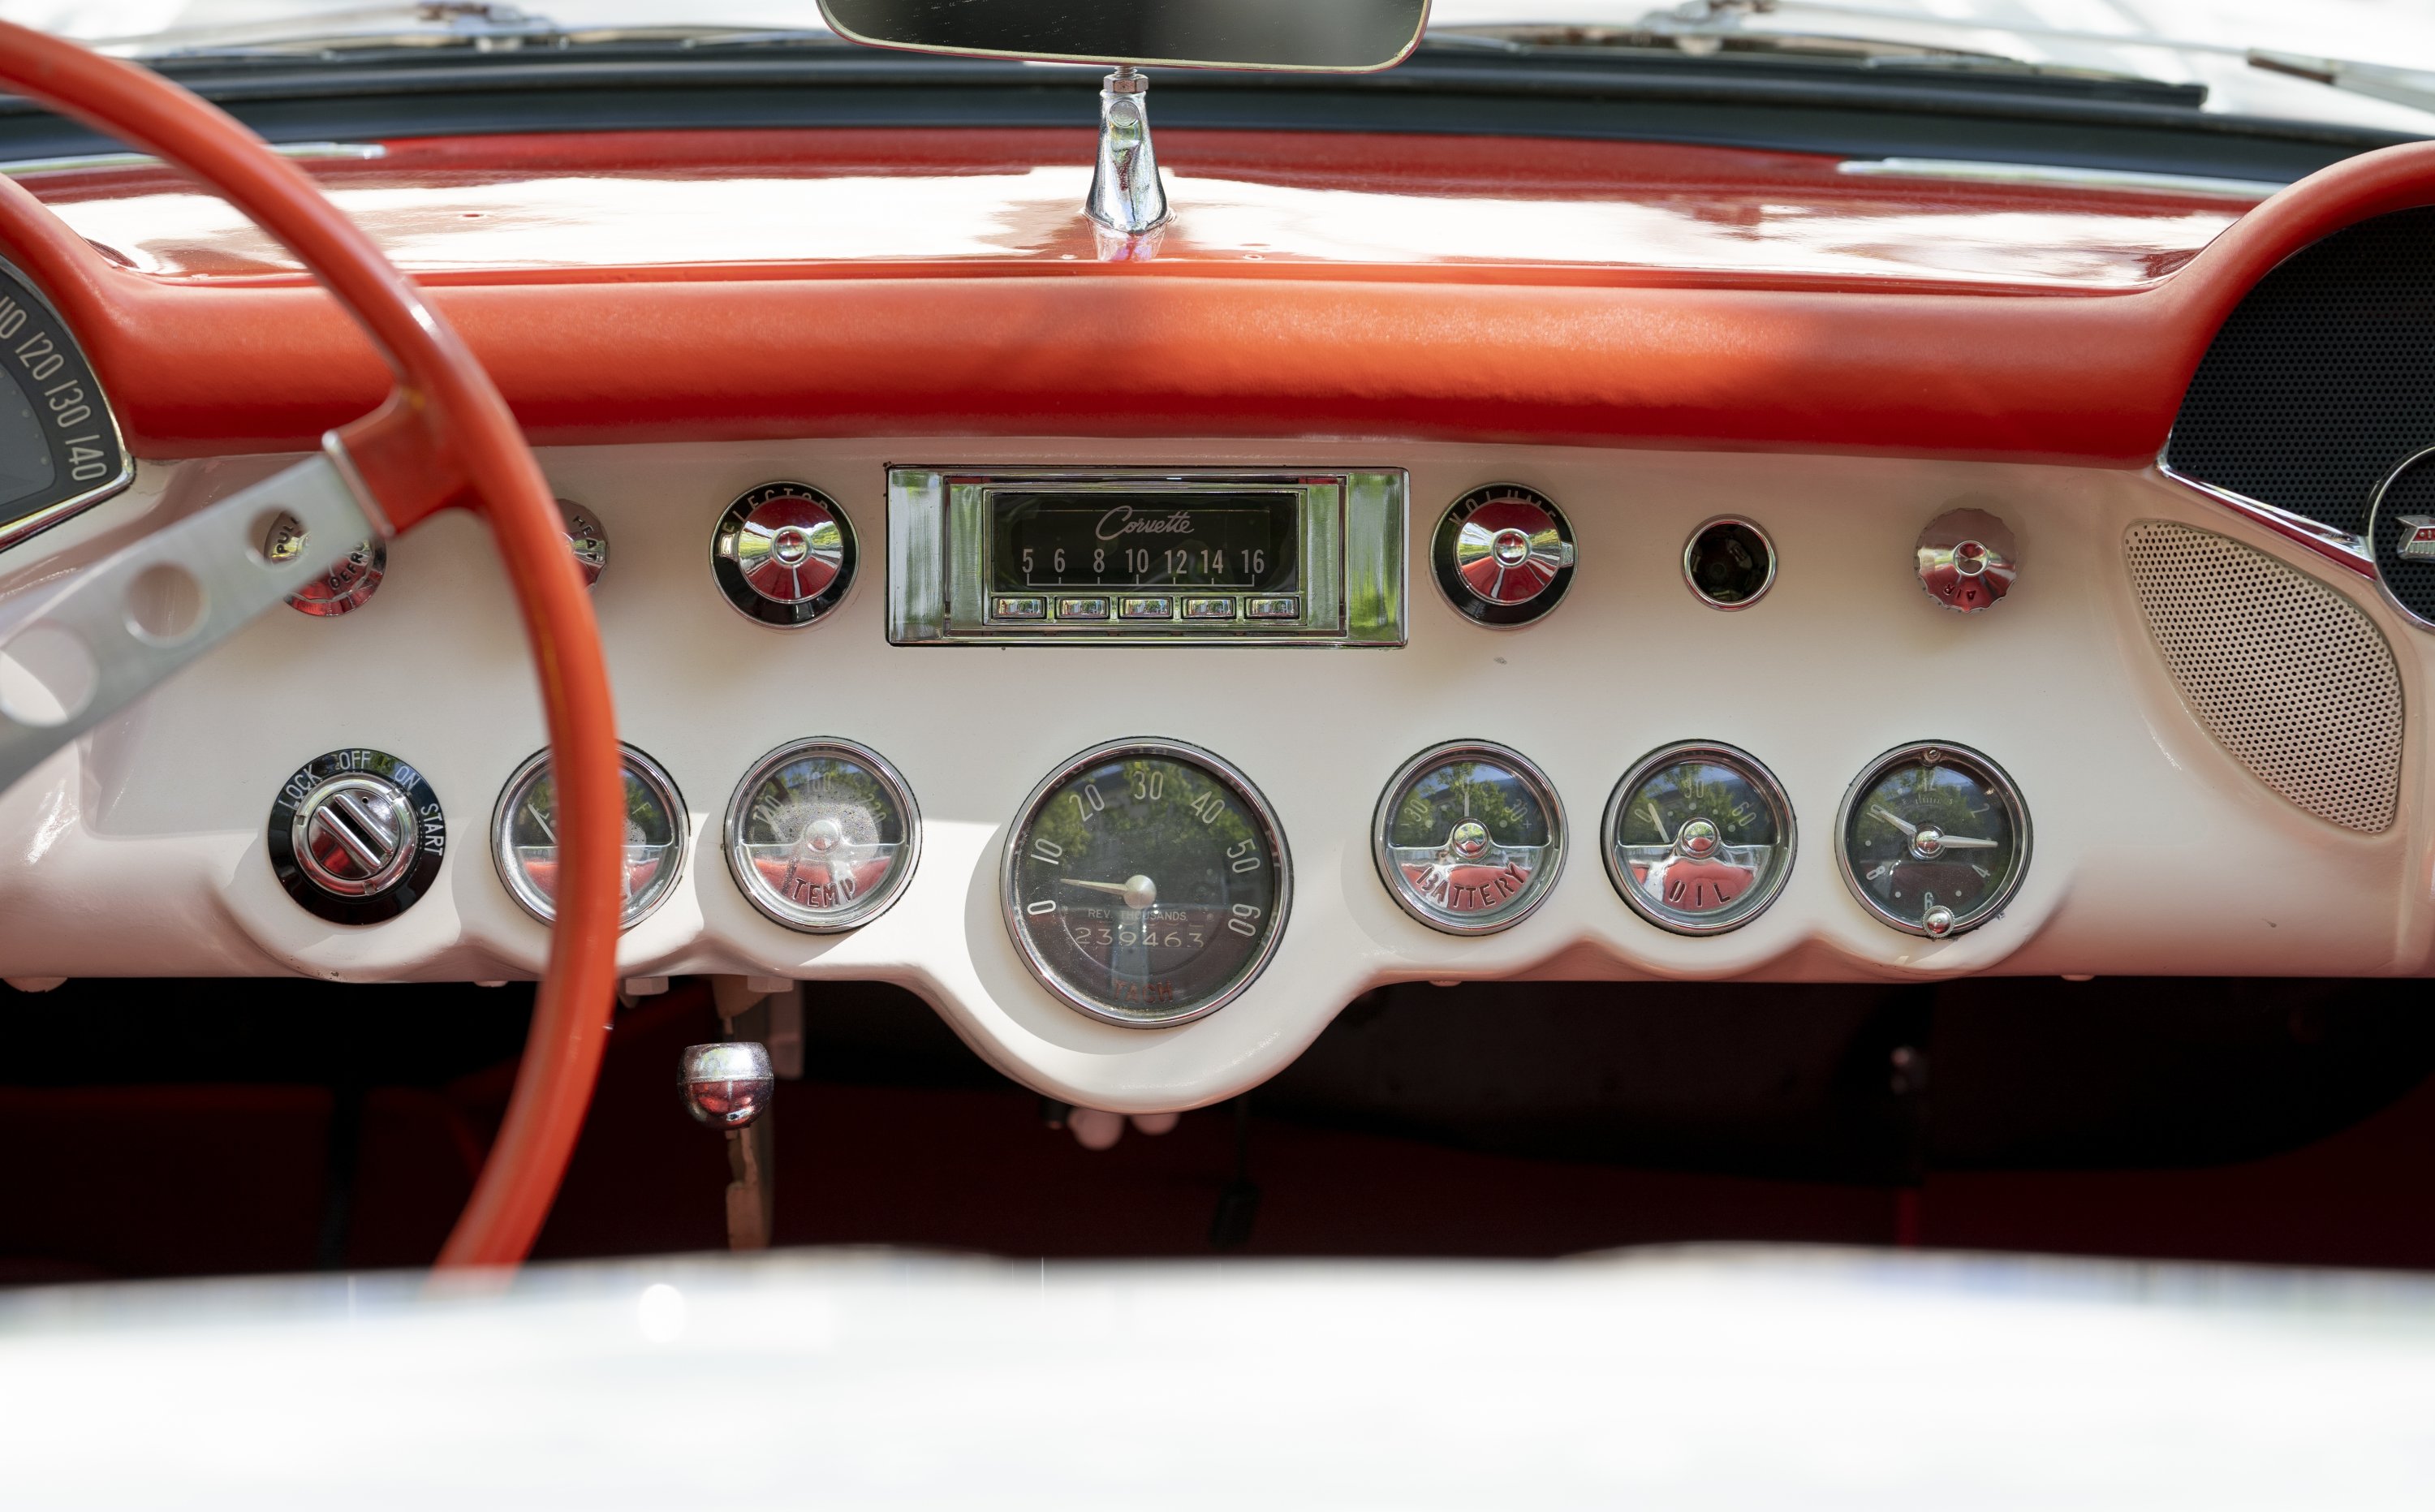 The owners of rare classic cars will find it hard to track down bodywork panels along with items like brightwork and interior components, May 20, 2019. (dpa Photo)